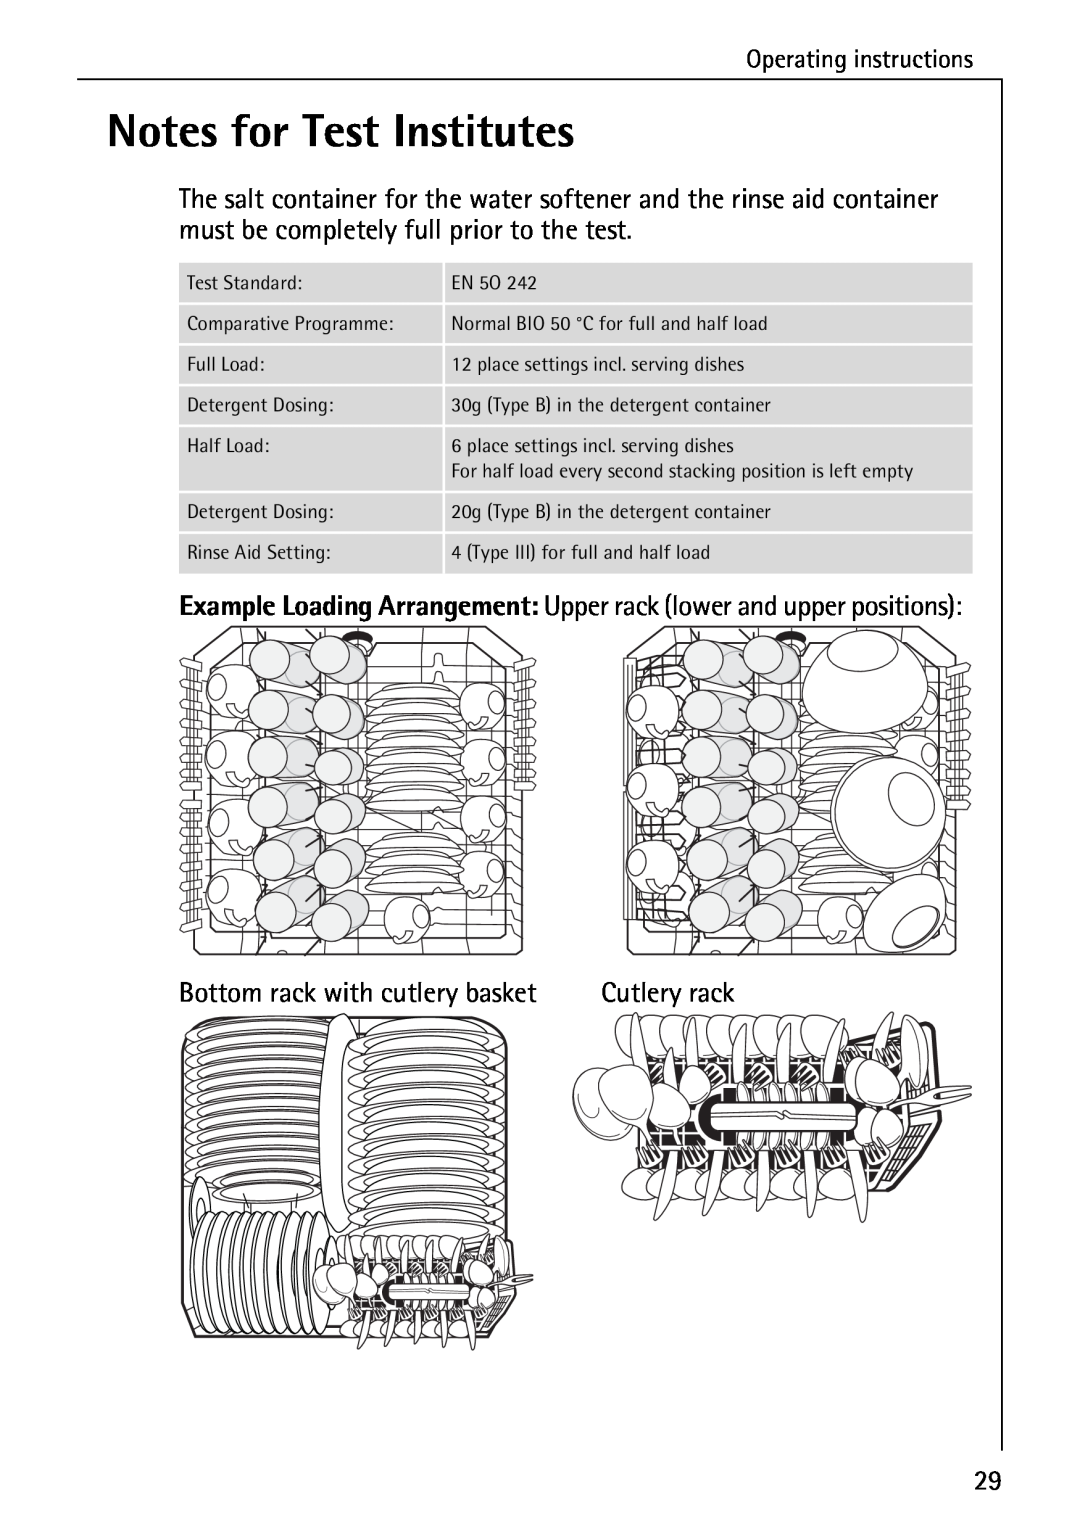 AEG 5071 manual Notes for Test Institutes, Bottom rack with cutlery basket, Operating instructions 